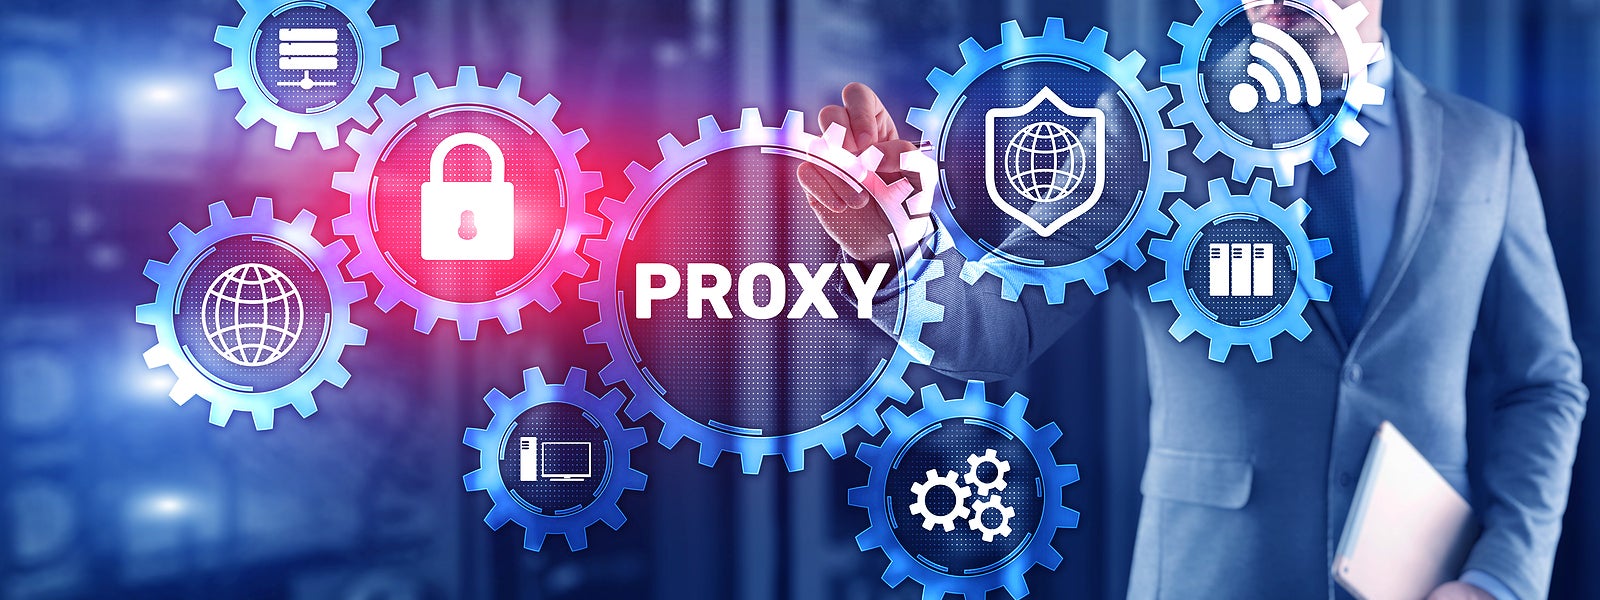 Here’s Why Your Small Business Needs a Proxy